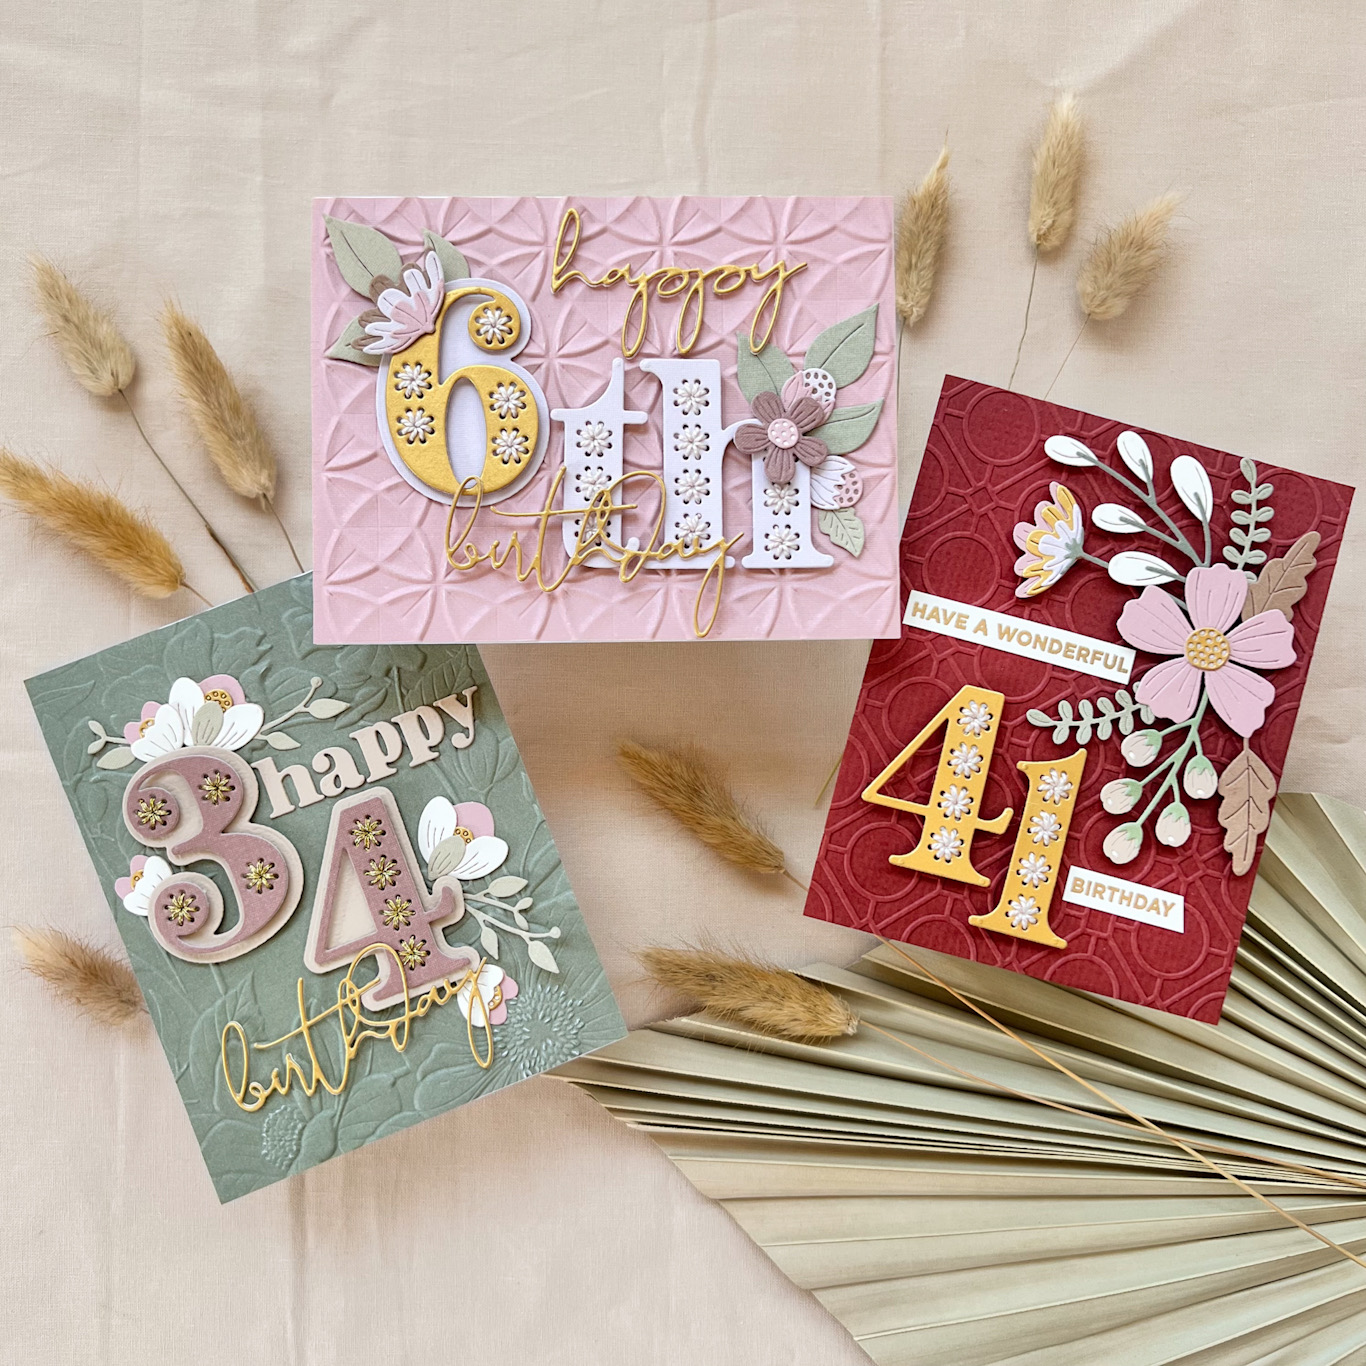 Let's Make Some Fun Cards using the Boho Trends Collection from